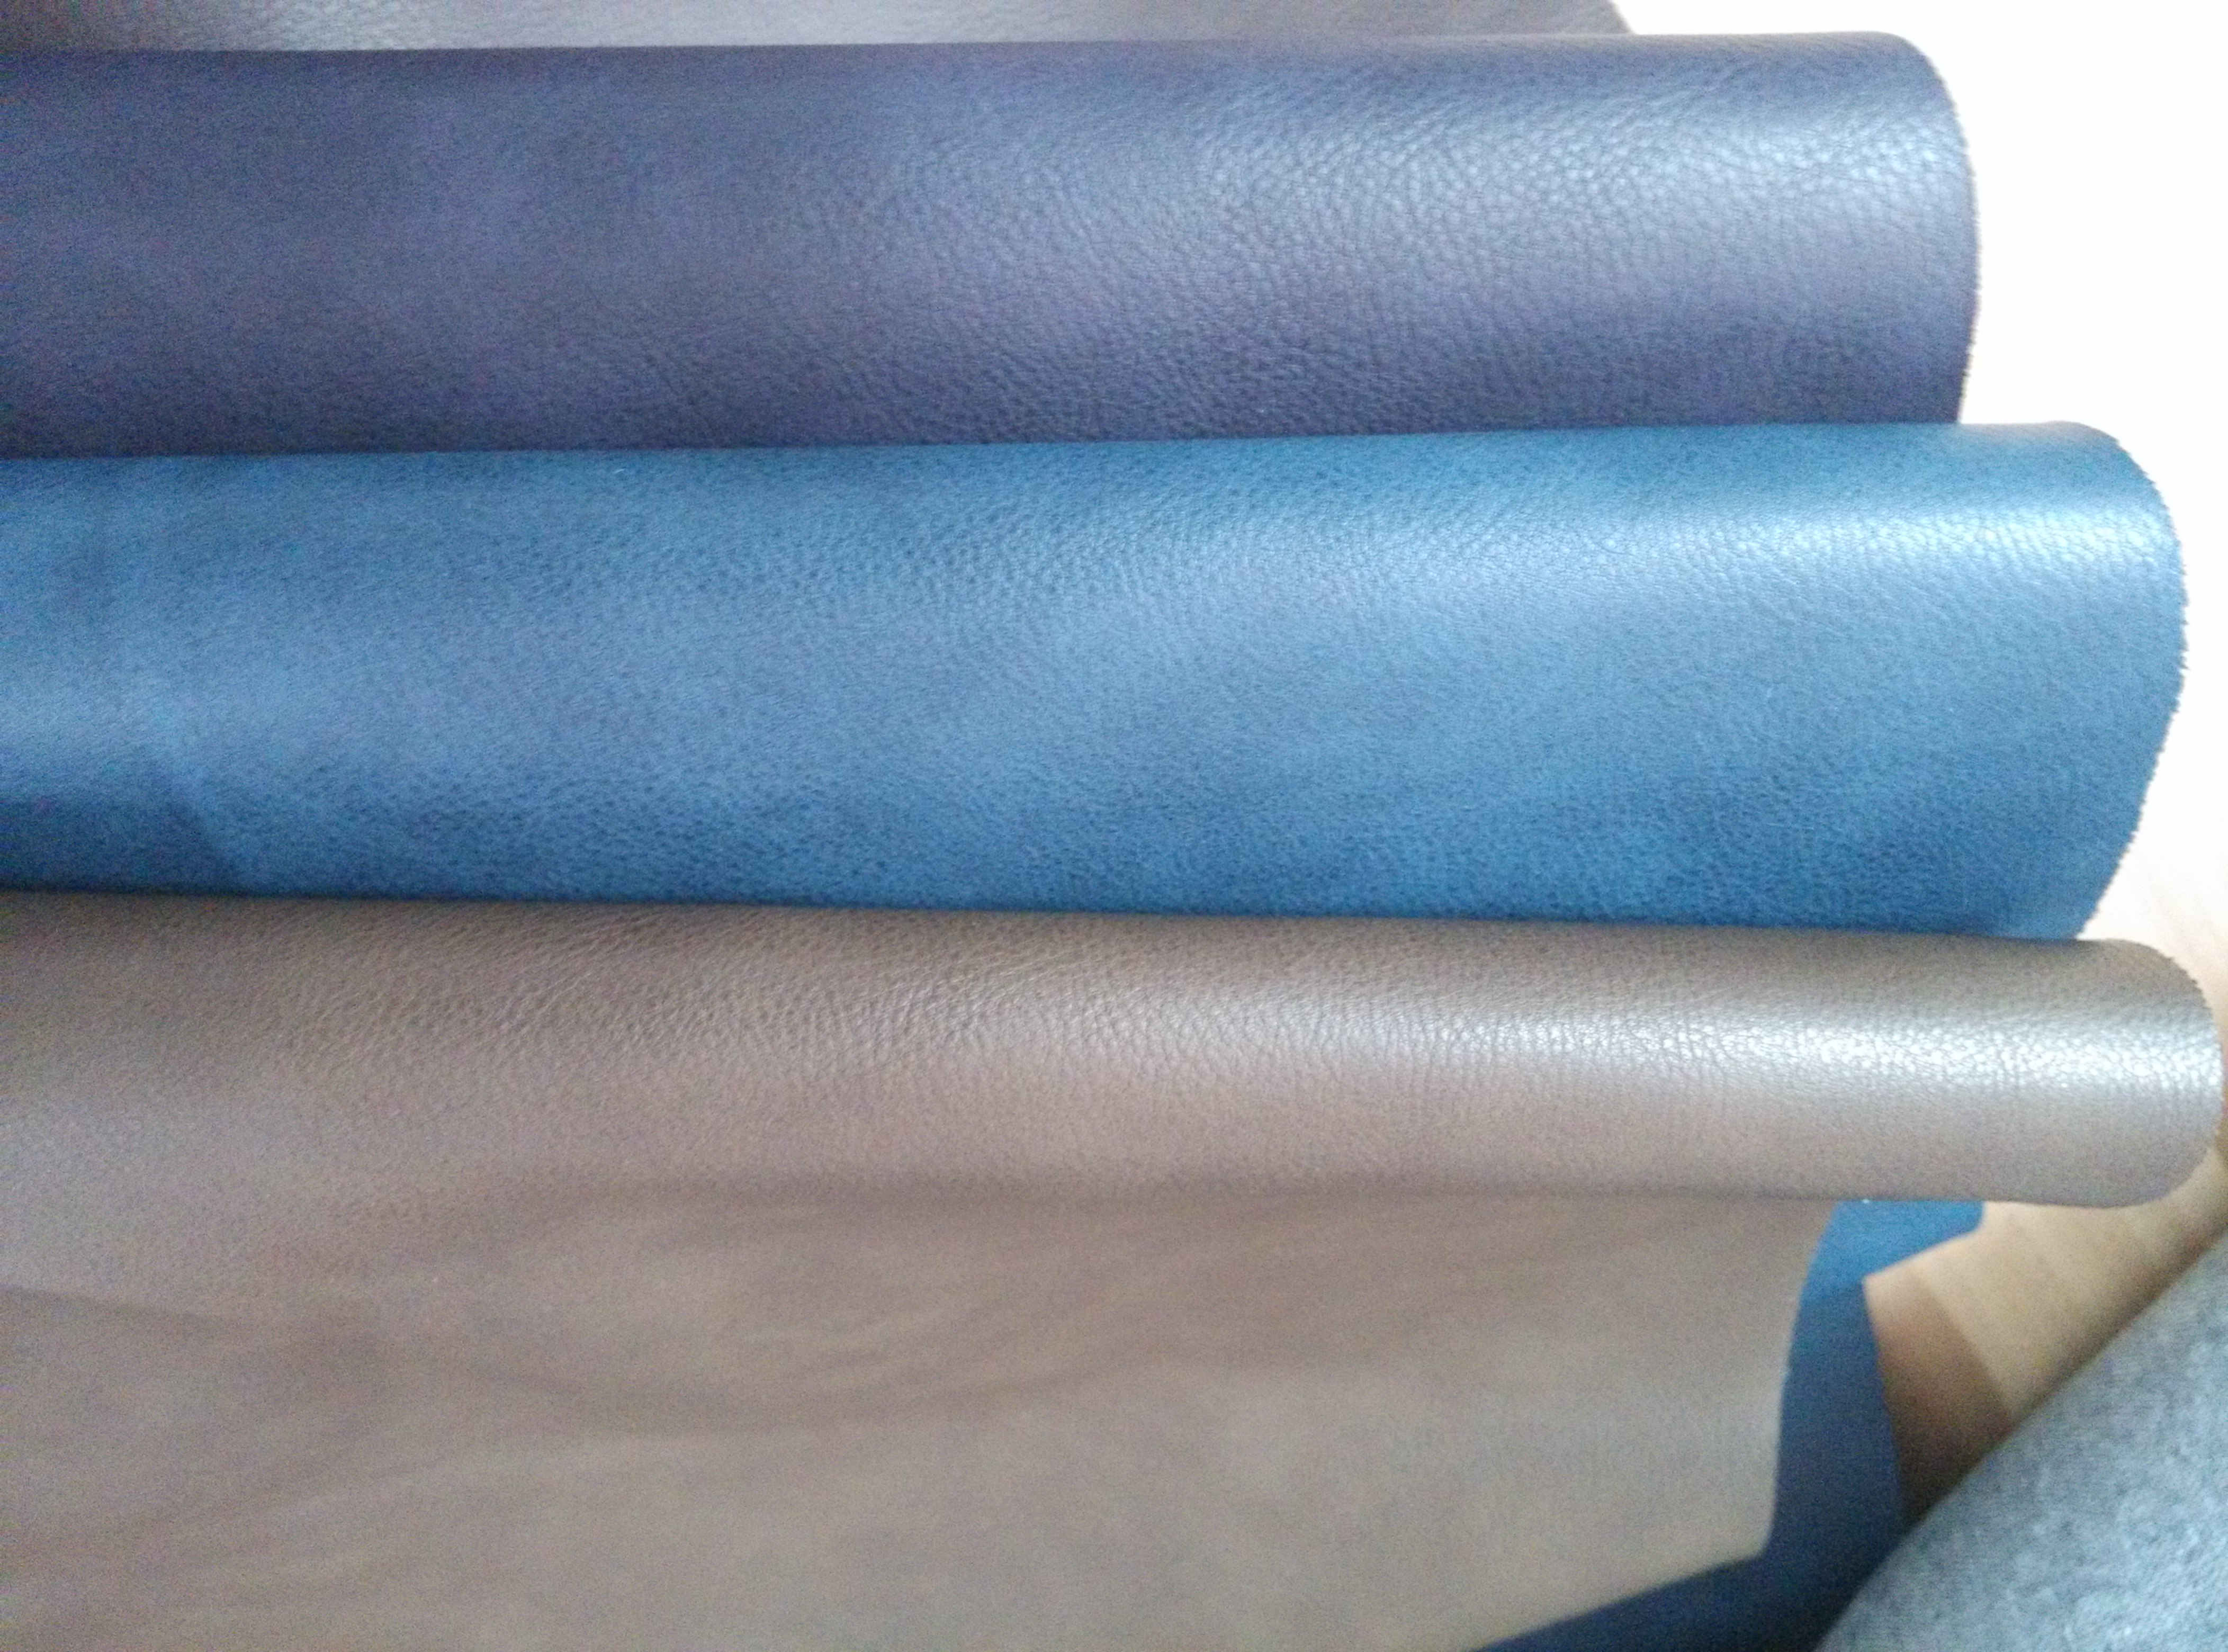 pu leather for garments - BZ Leather Company